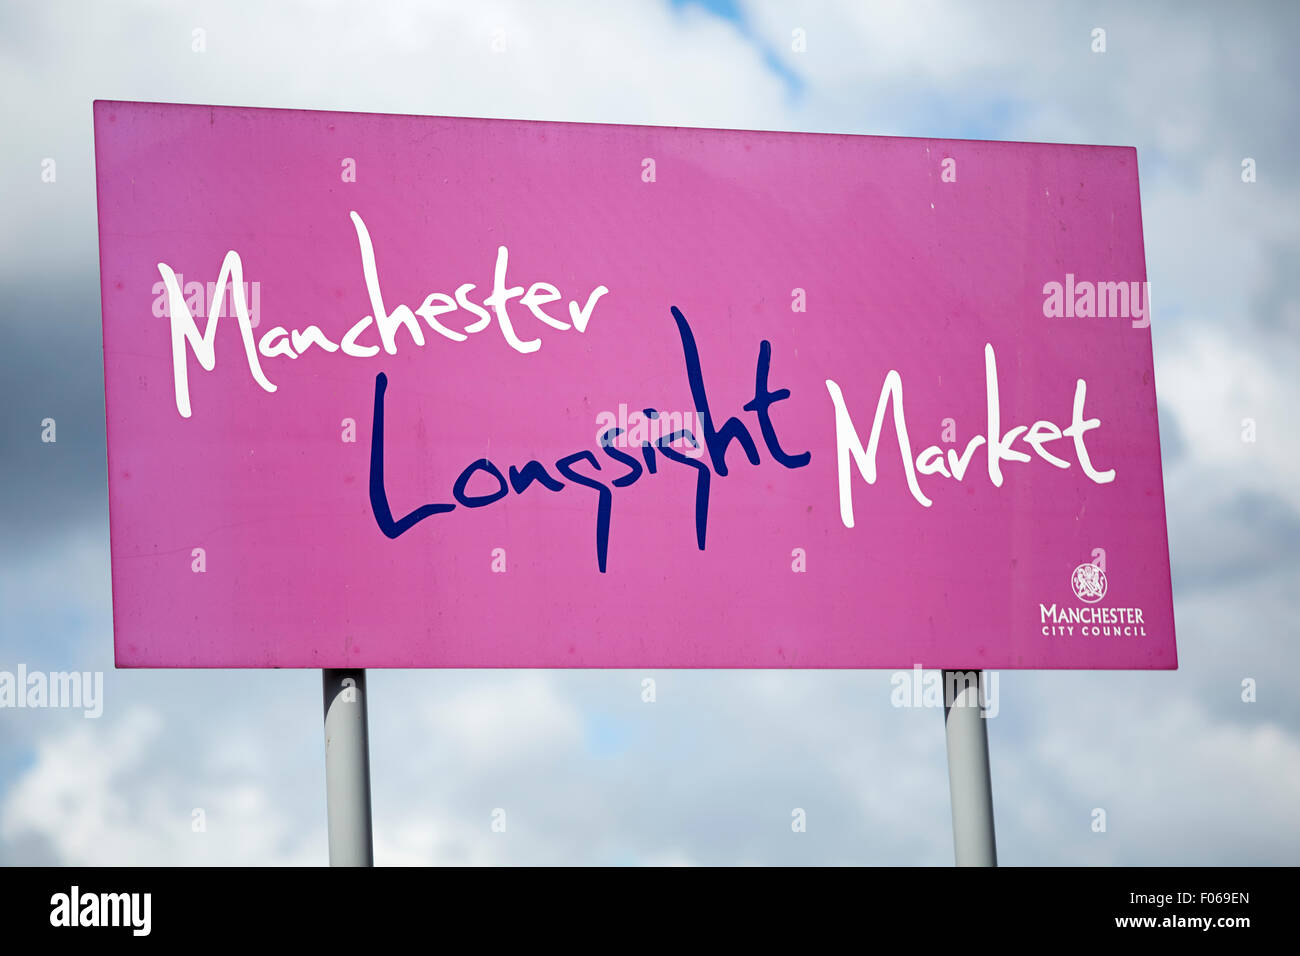 Longsight market in Manchester Uk  Shop shopping shopper store retail supermarket retailer retailers traders trading outlet buyi Stock Photo